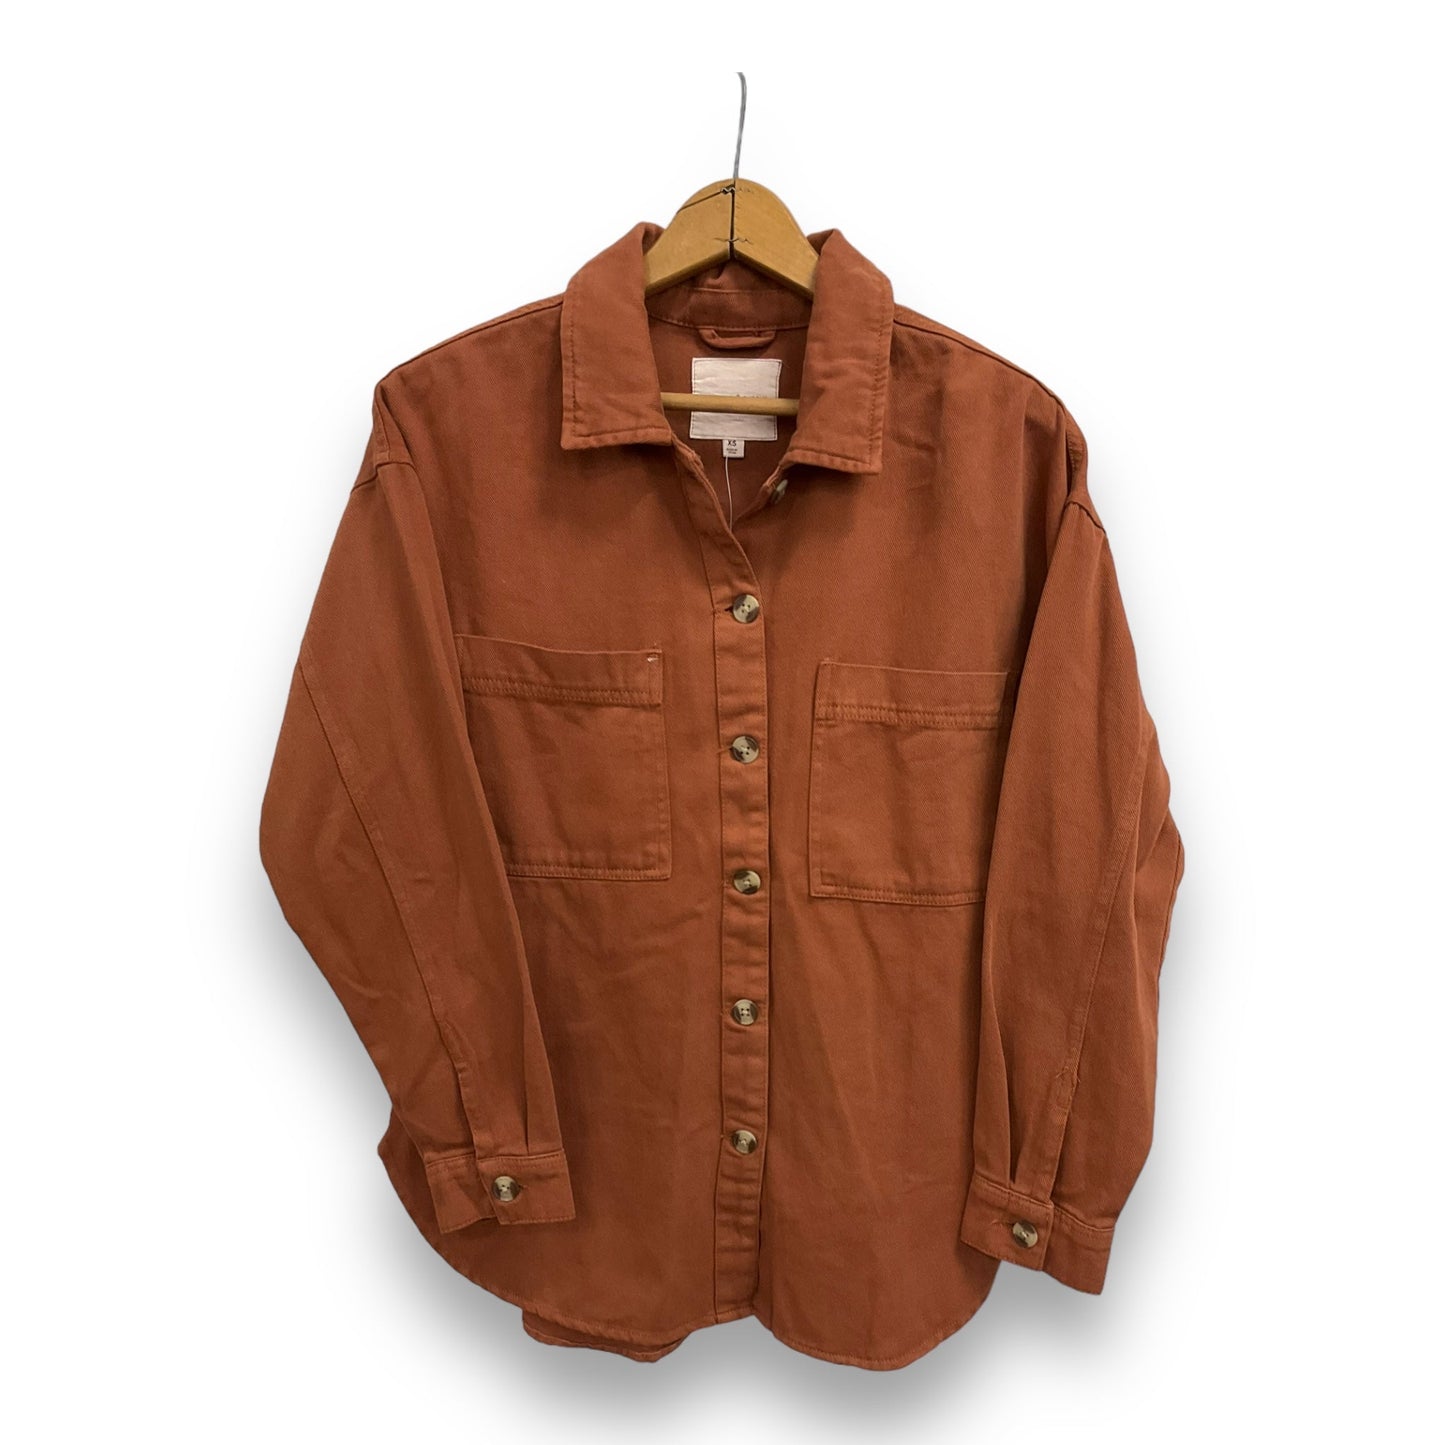 Jacket Shirt By Thread And Supply  Size: Xs